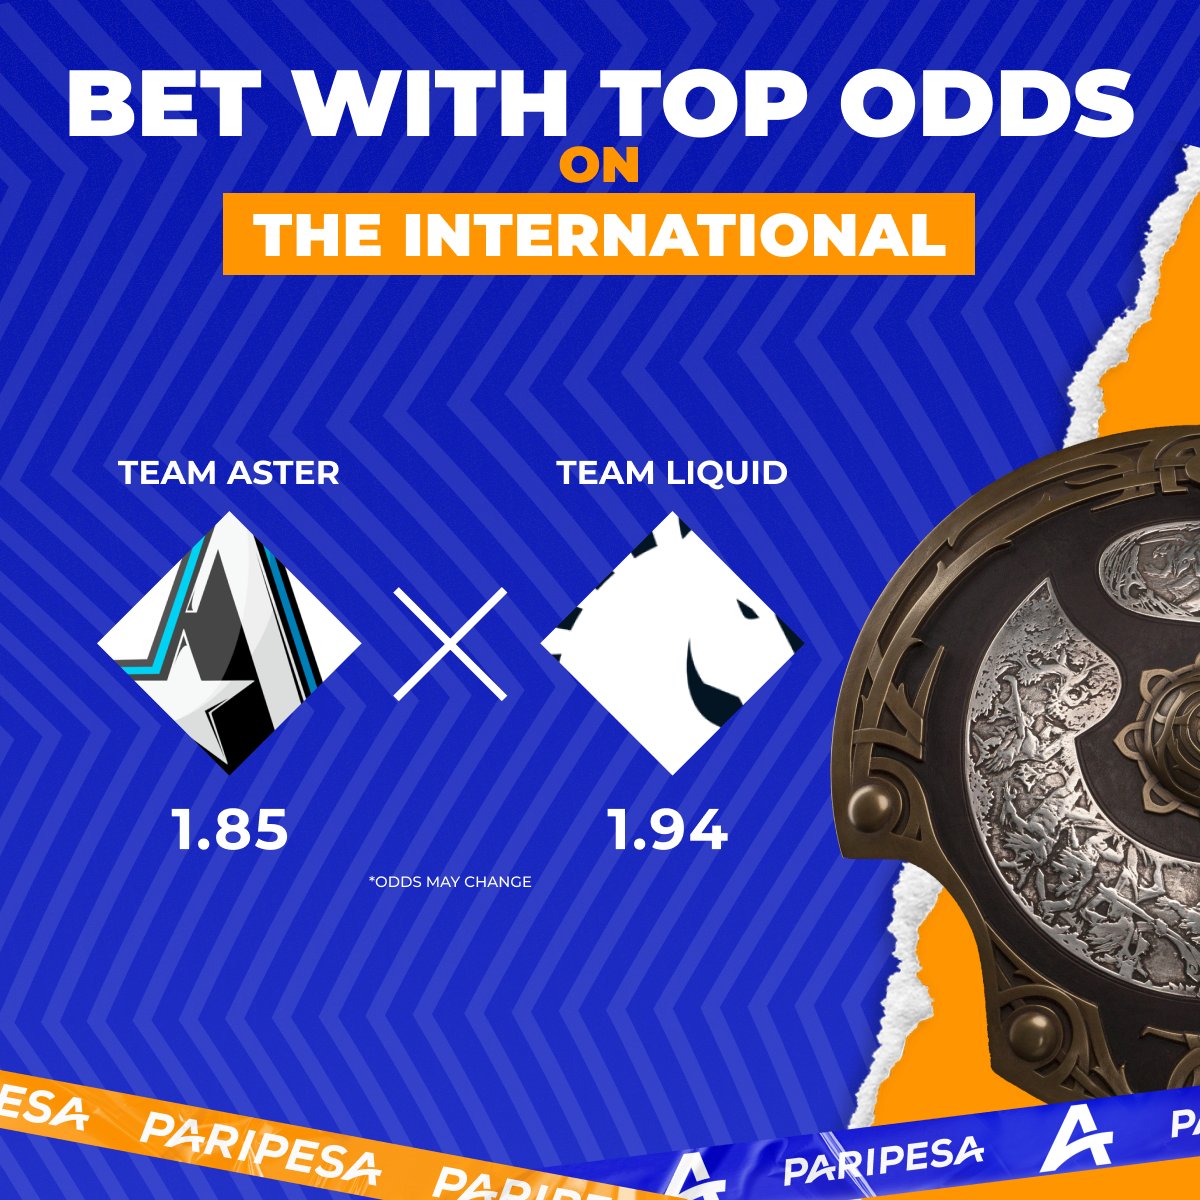 🙌📢 Welcome to the International! 👉📅 On October 29th, the semi-final of the lower bracket: 🇨🇳Team Aster VS Team Liquid🇪🇺 (best of 3) 💰 Prize pool - $18,241,259 USD 🔥 Who will take part of the prize money? m.paripesa.bet/jbn4 #TheInternational2022 #TI11